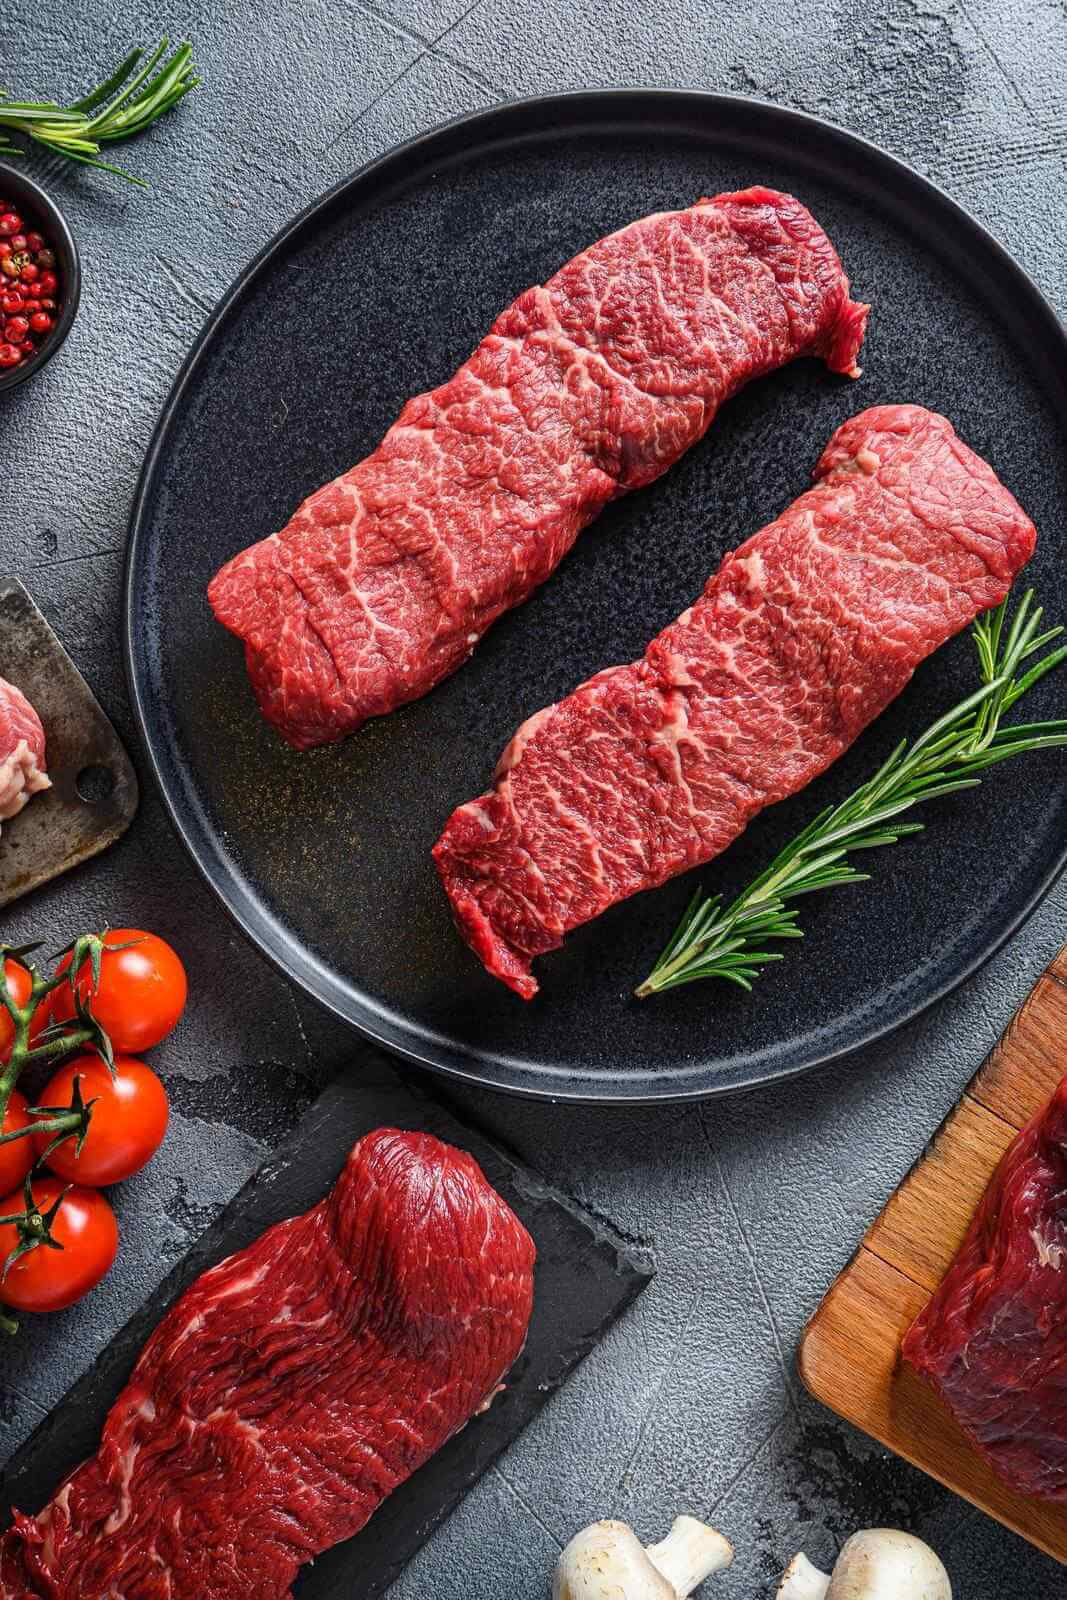 Premium quality grass fed beef fillet are delicious and best value